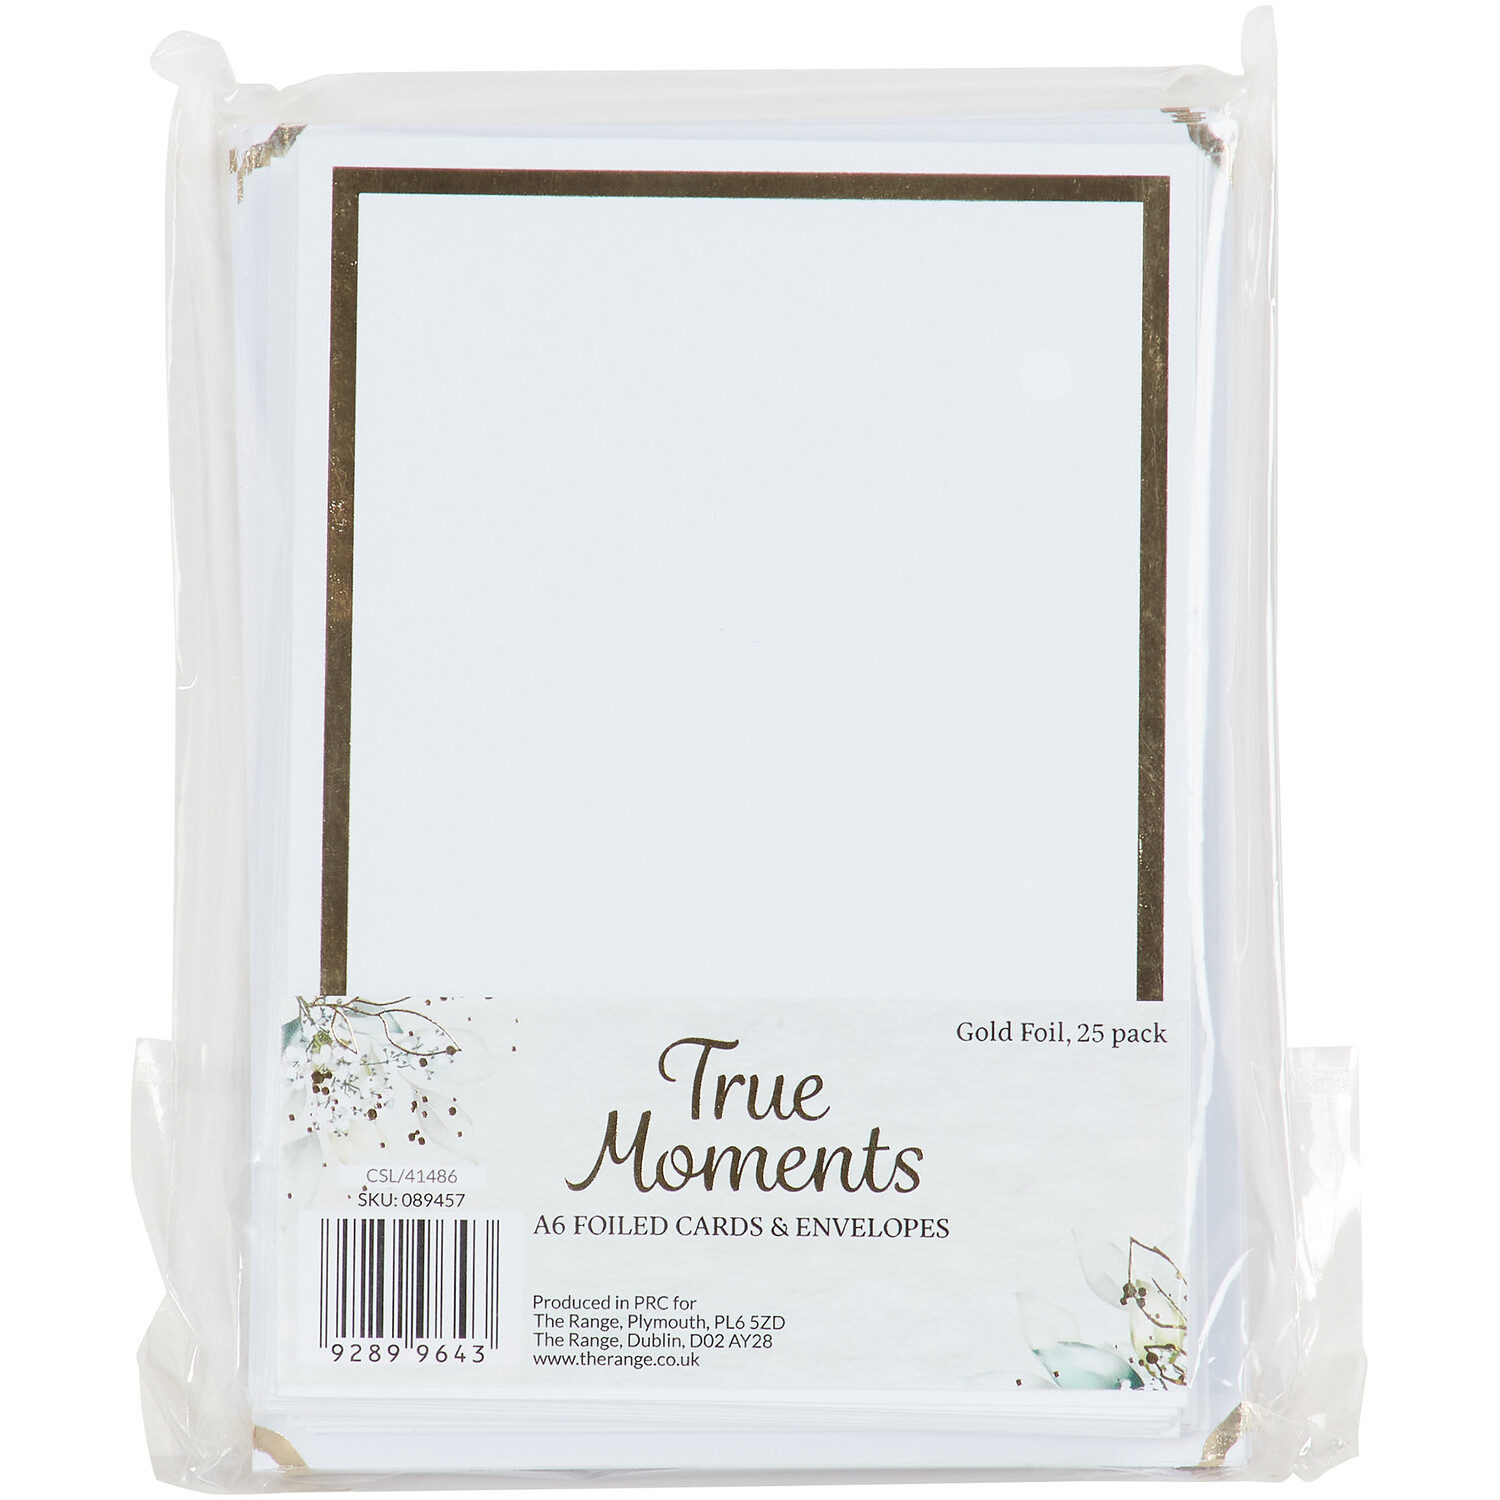 True Moments A6 Foiled Cards and Envelopes Image 2